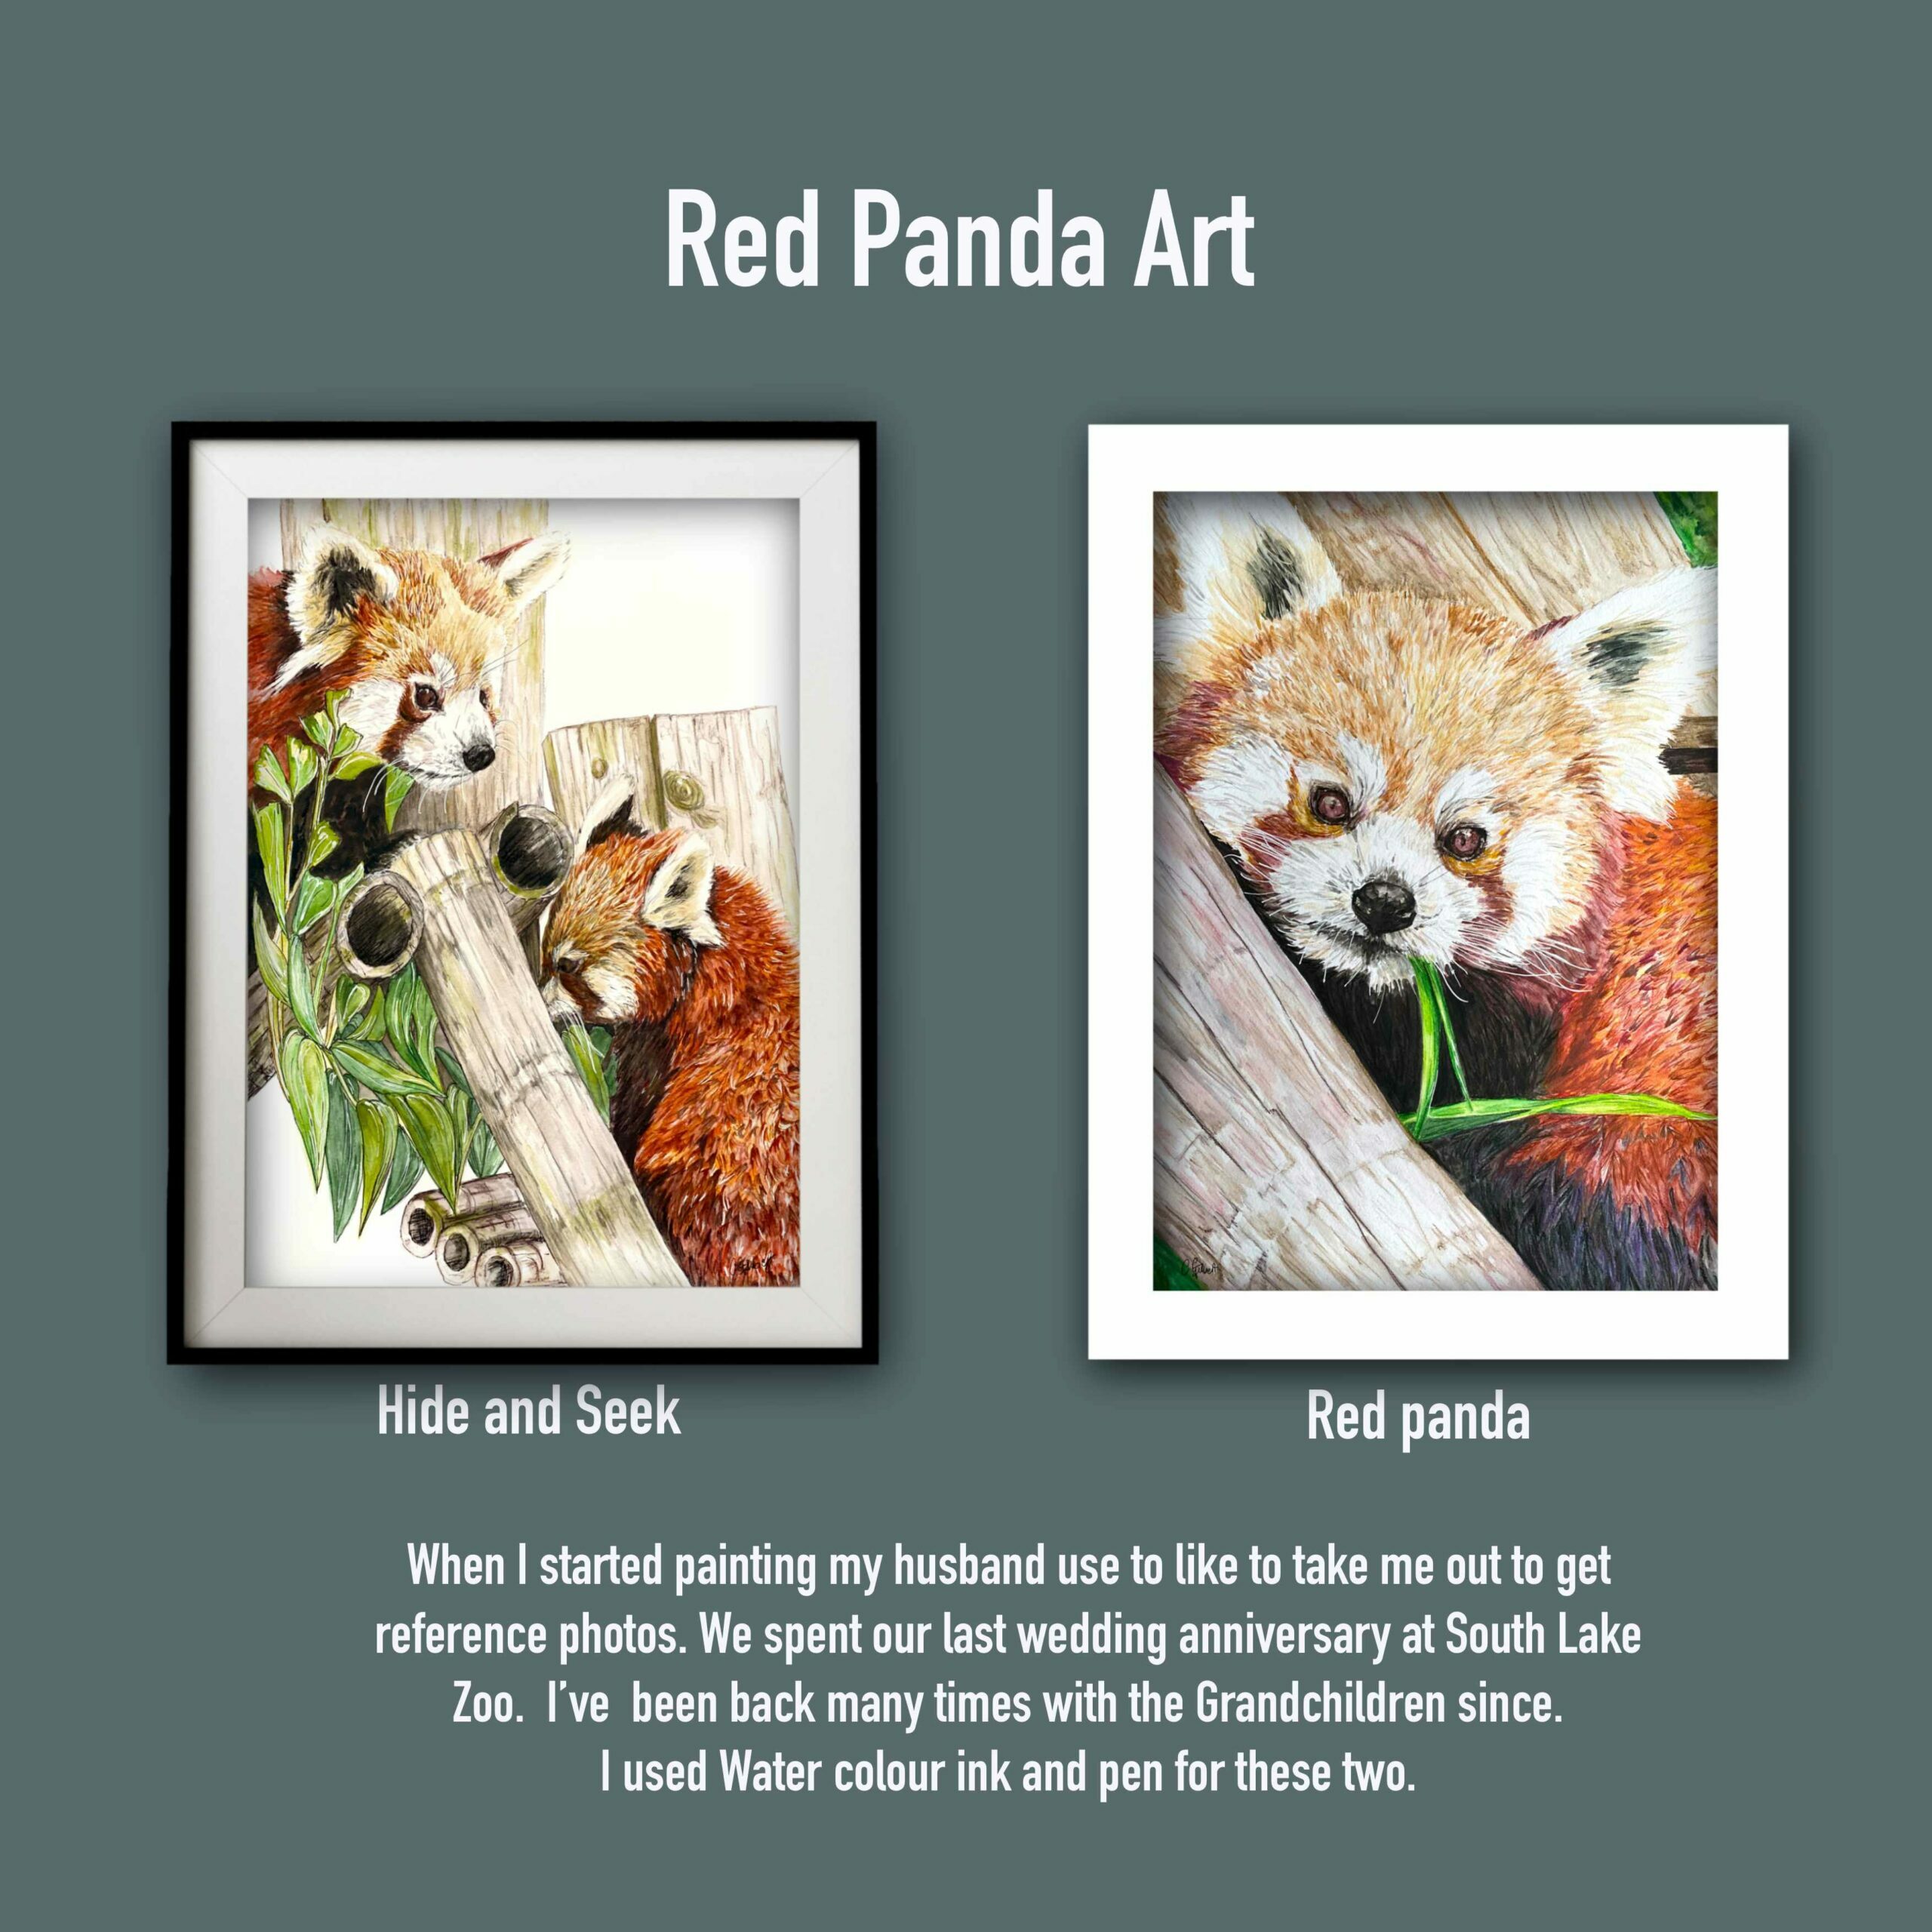 Two pieces of artwork 1. Red panda portrait 
2. Two red pandas playing “hide and seek”